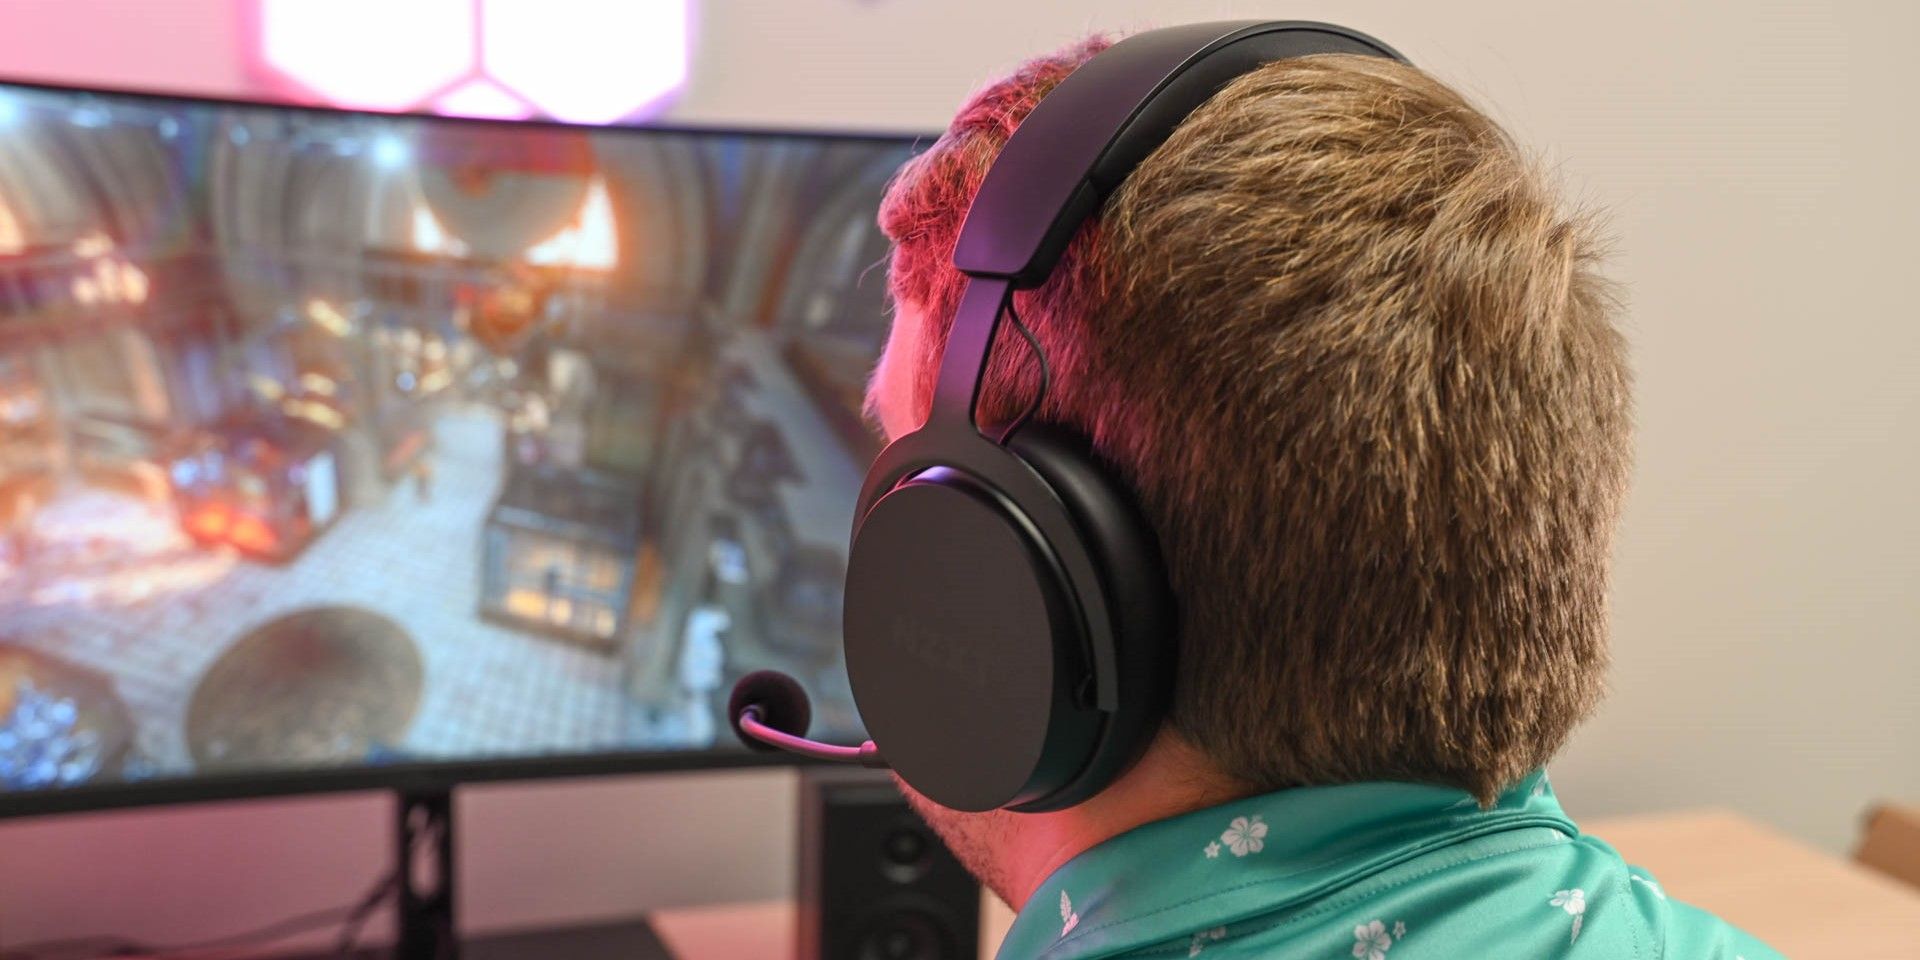 Person wearing a Headset while gaming